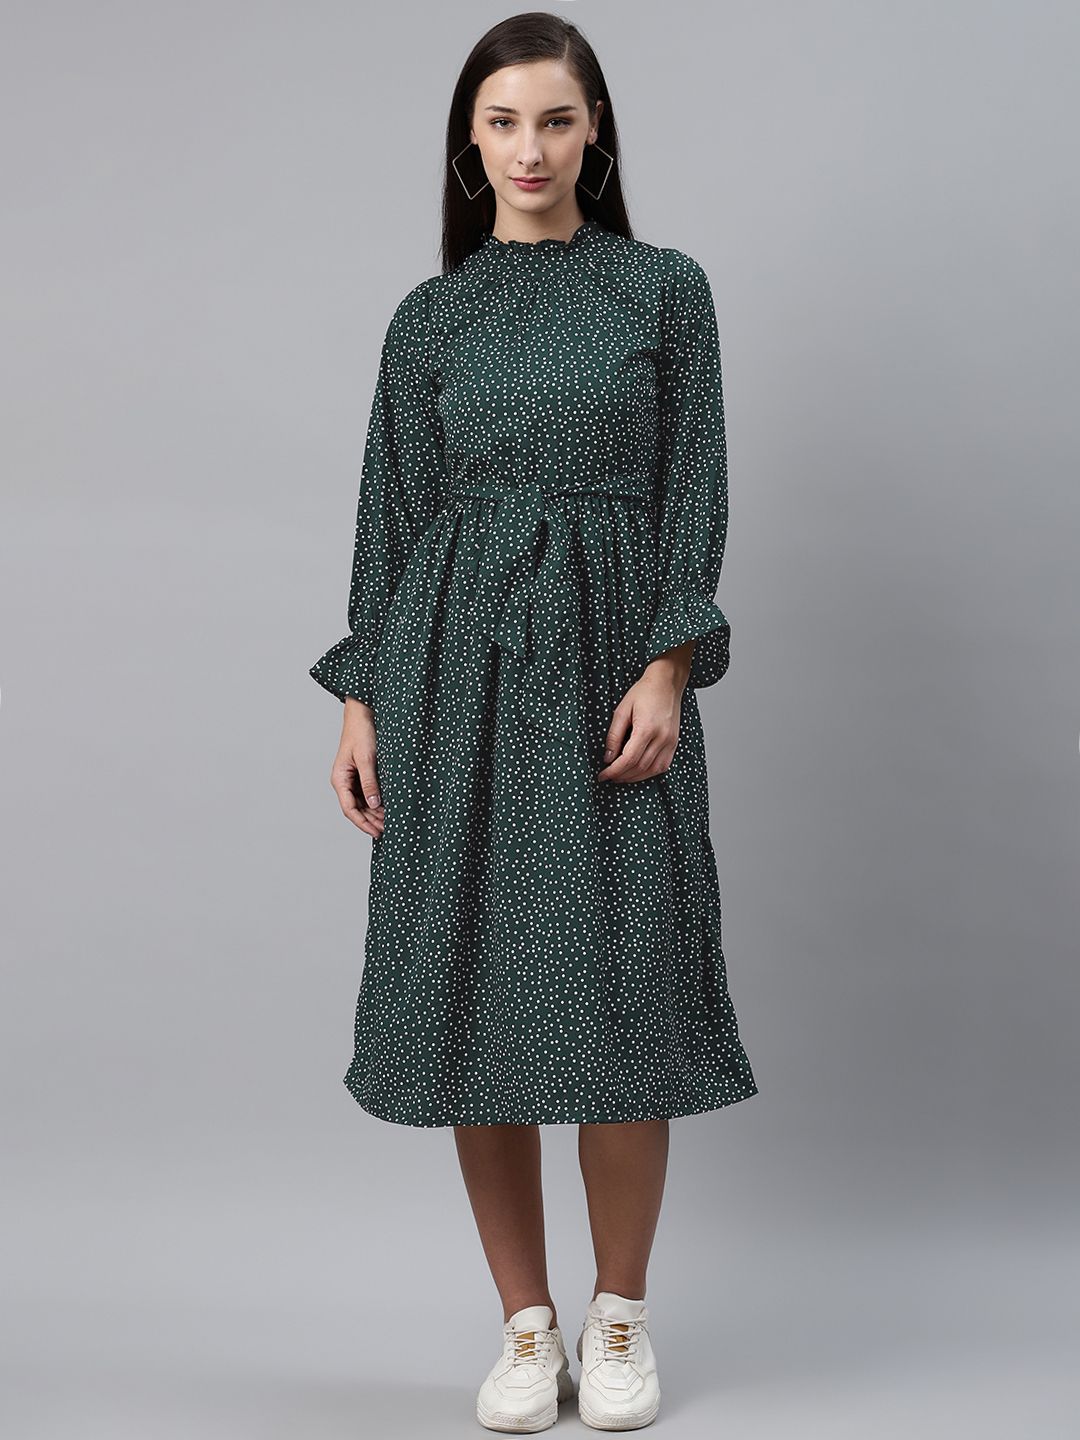 plusS Women Green & White Dotted Print A-Line Dress with Belt Price in India